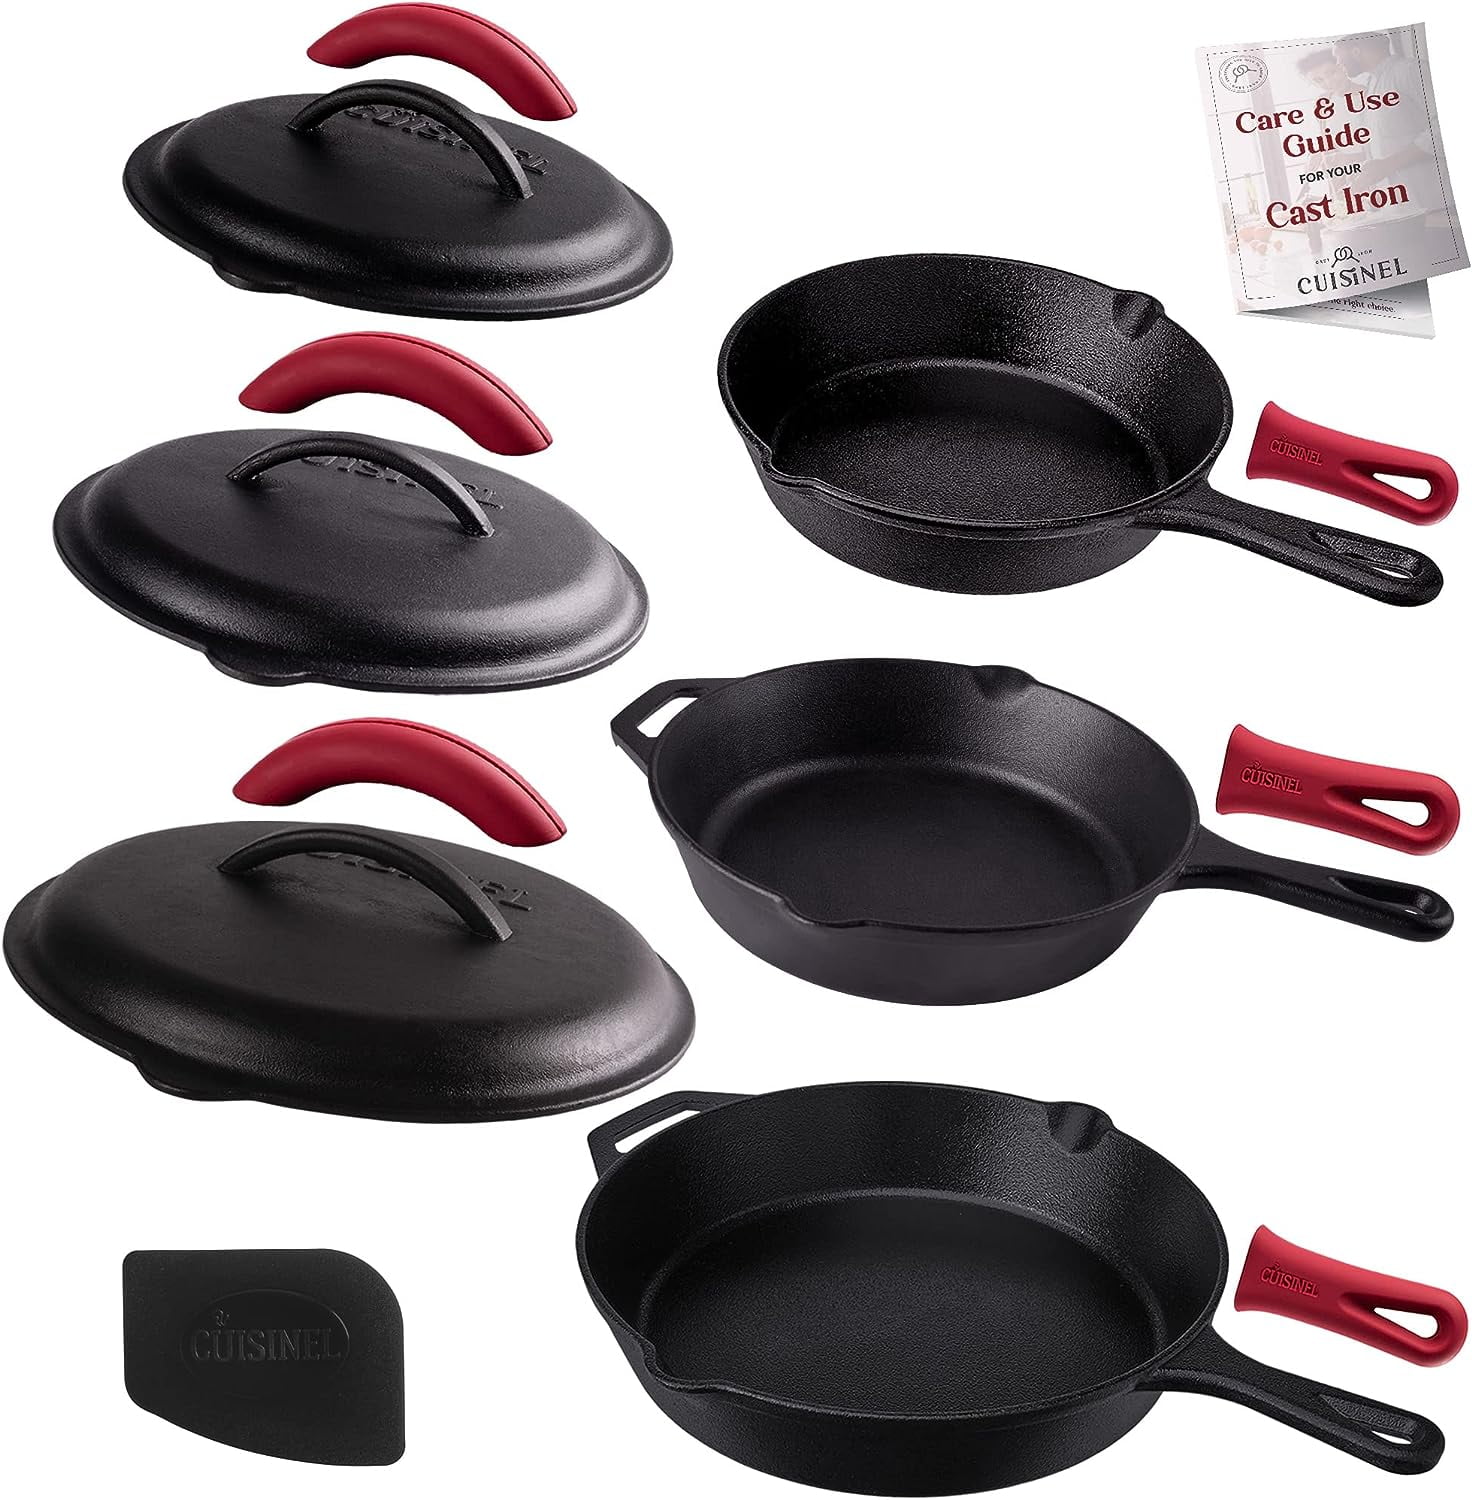  Cast Iron Skillet - 12-Inch Frying Pan with Assist Handle and  Pour Spots + Silicone Grip Cove + Cast Iron Lid - Fits 12-Inch Lodge  Skillet Frying Pans or Braiser +